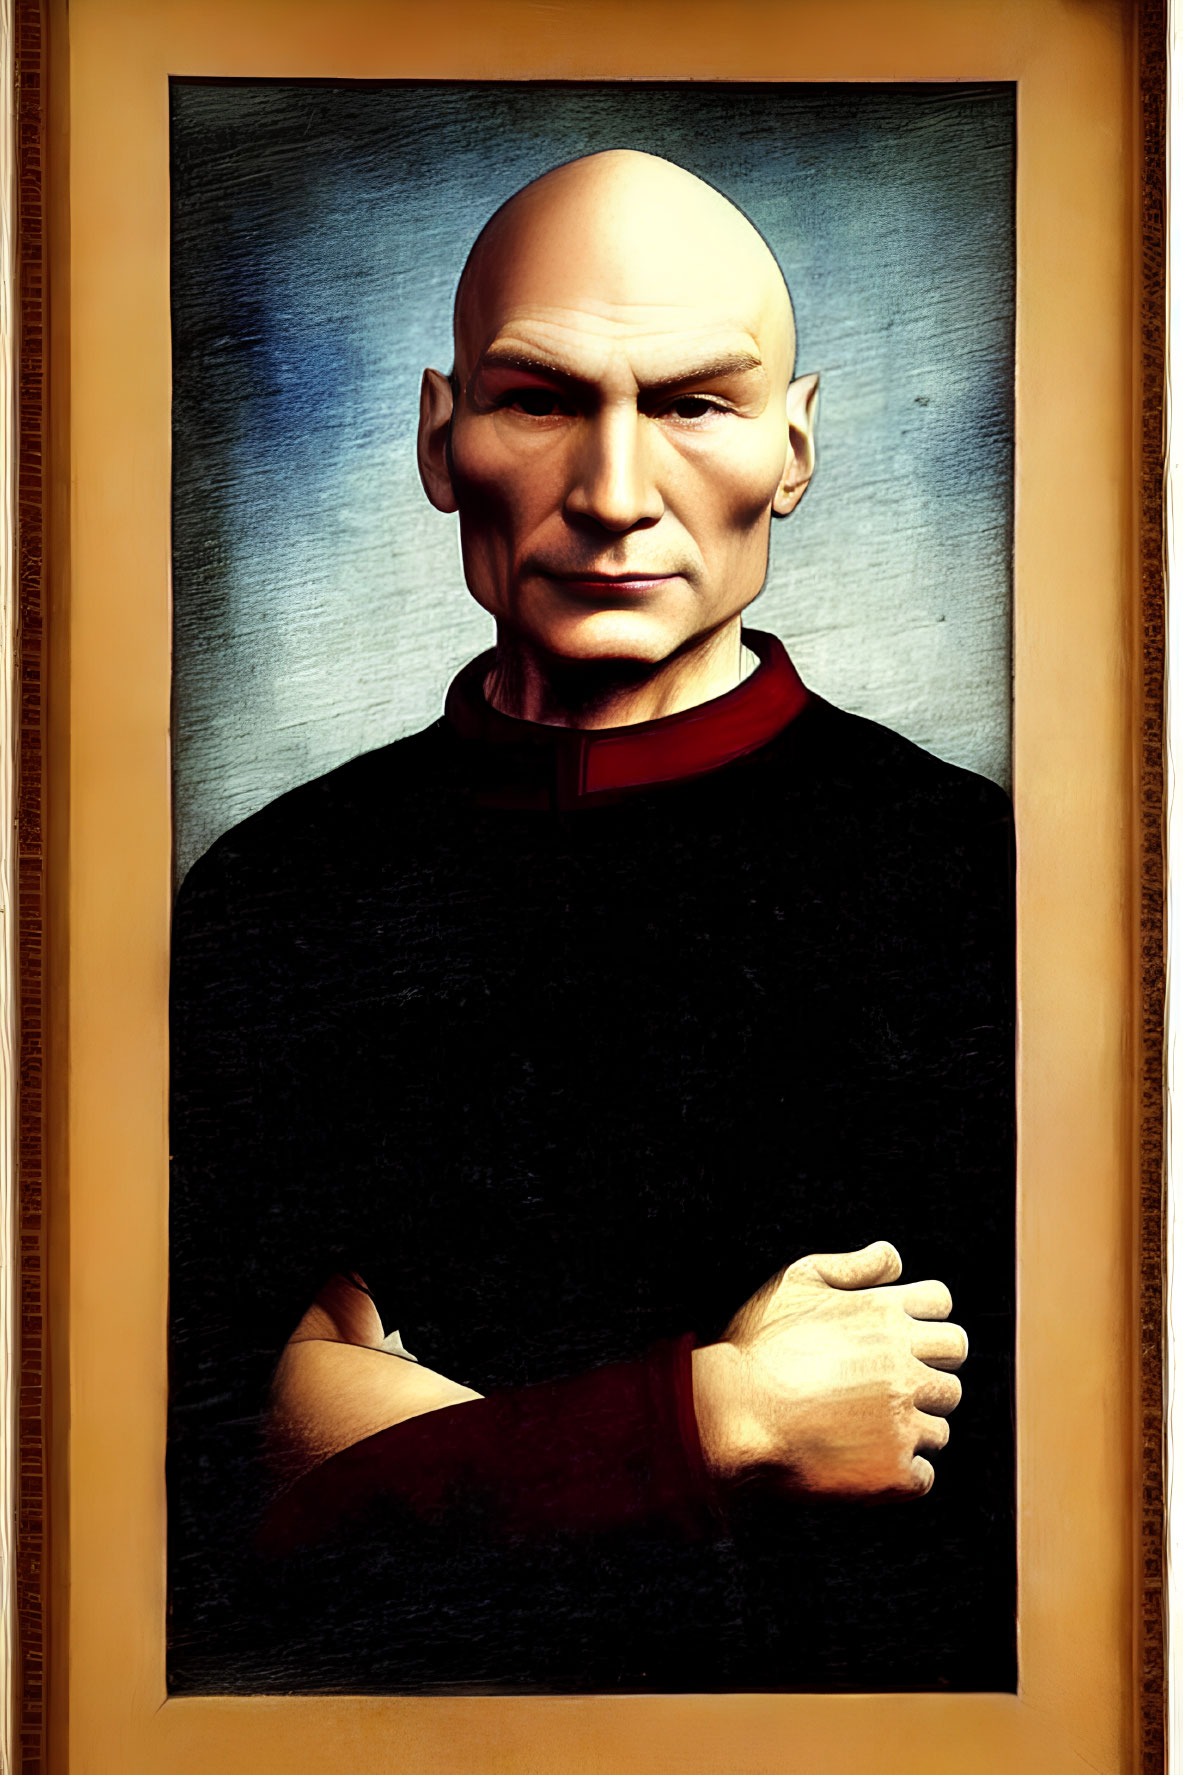 Bald Male Character Portrait in Black and Red Uniform